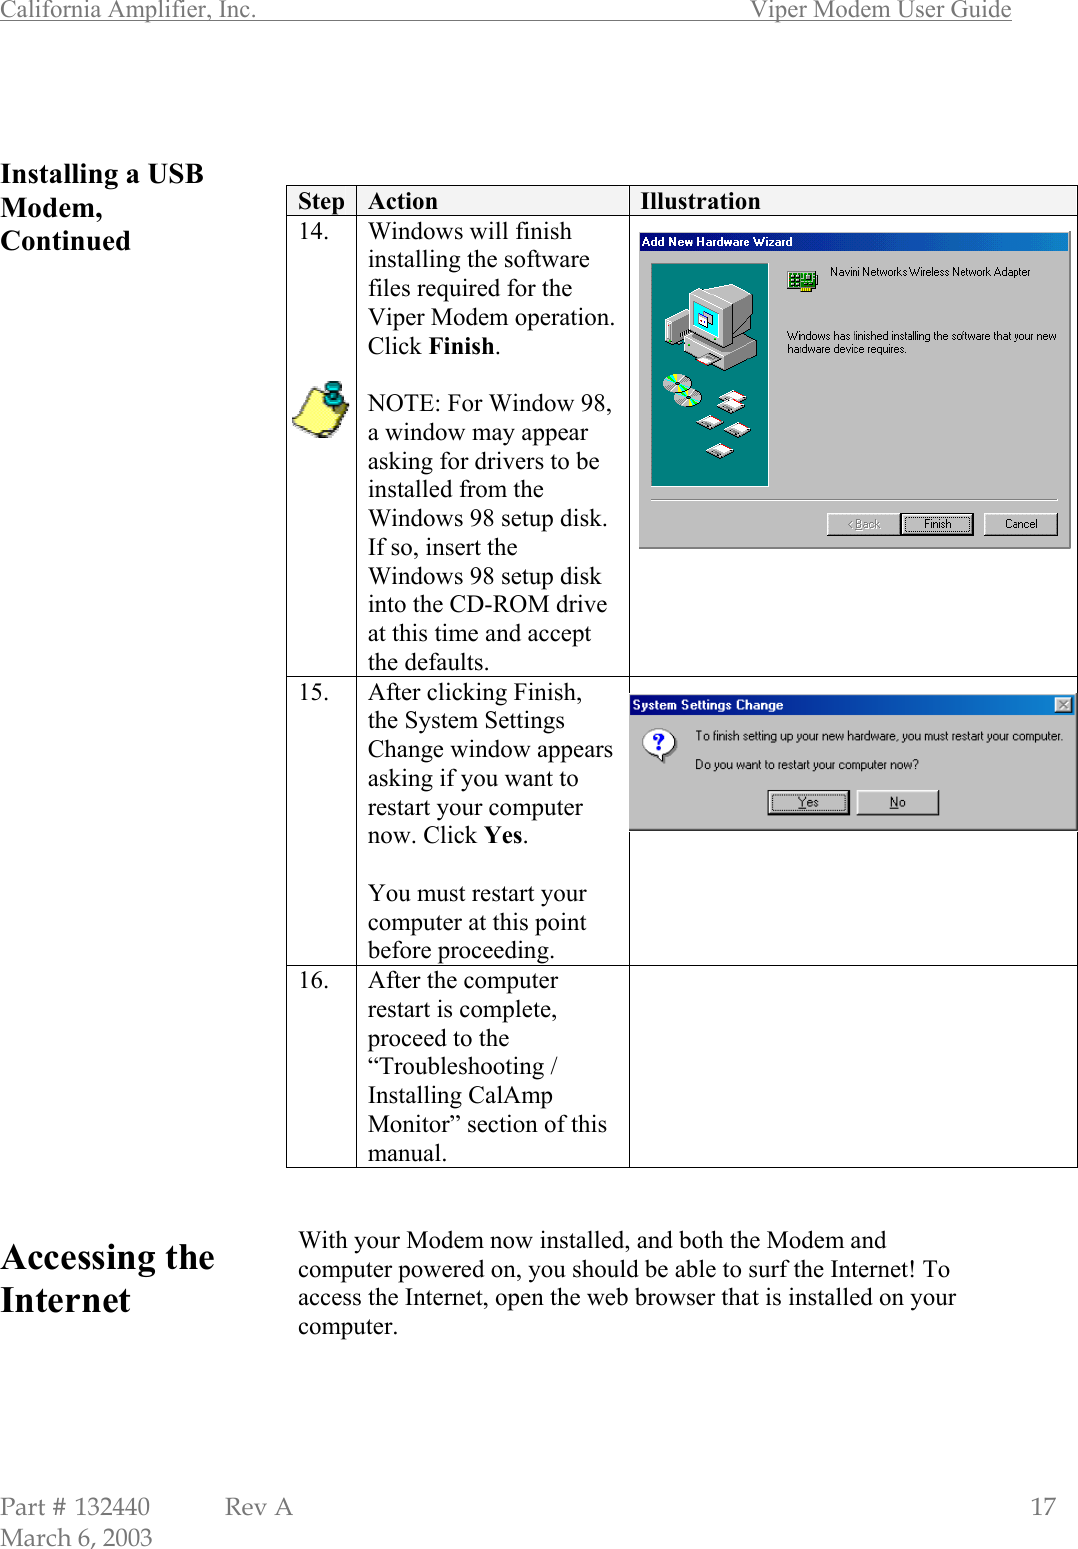 California Amplifier, Inc.       Viper Modem User Guide Part # 132440  Rev A                                                   17 March 6, 2003   Installing a USB Modem, Continued                                   Accessing the Internet        Step  Action  Illustration 14.  Windows will finish installing the software files required for the Viper Modem operation. Click Finish.  NOTE: For Window 98, a window may appear asking for drivers to be installed from the Windows 98 setup disk. If so, insert the Windows 98 setup disk into the CD-ROM drive at this time and accept the defaults.  15.  After clicking Finish, the System Settings Change window appears asking if you want to restart your computer now. Click Yes.  You must restart your computer at this point before proceeding.  16.  After the computer restart is complete, proceed to the “Troubleshooting / Installing CalAmp Monitor” section of this manual.    With your Modem now installed, and both the Modem and computer powered on, you should be able to surf the Internet! To access the Internet, open the web browser that is installed on your computer.     